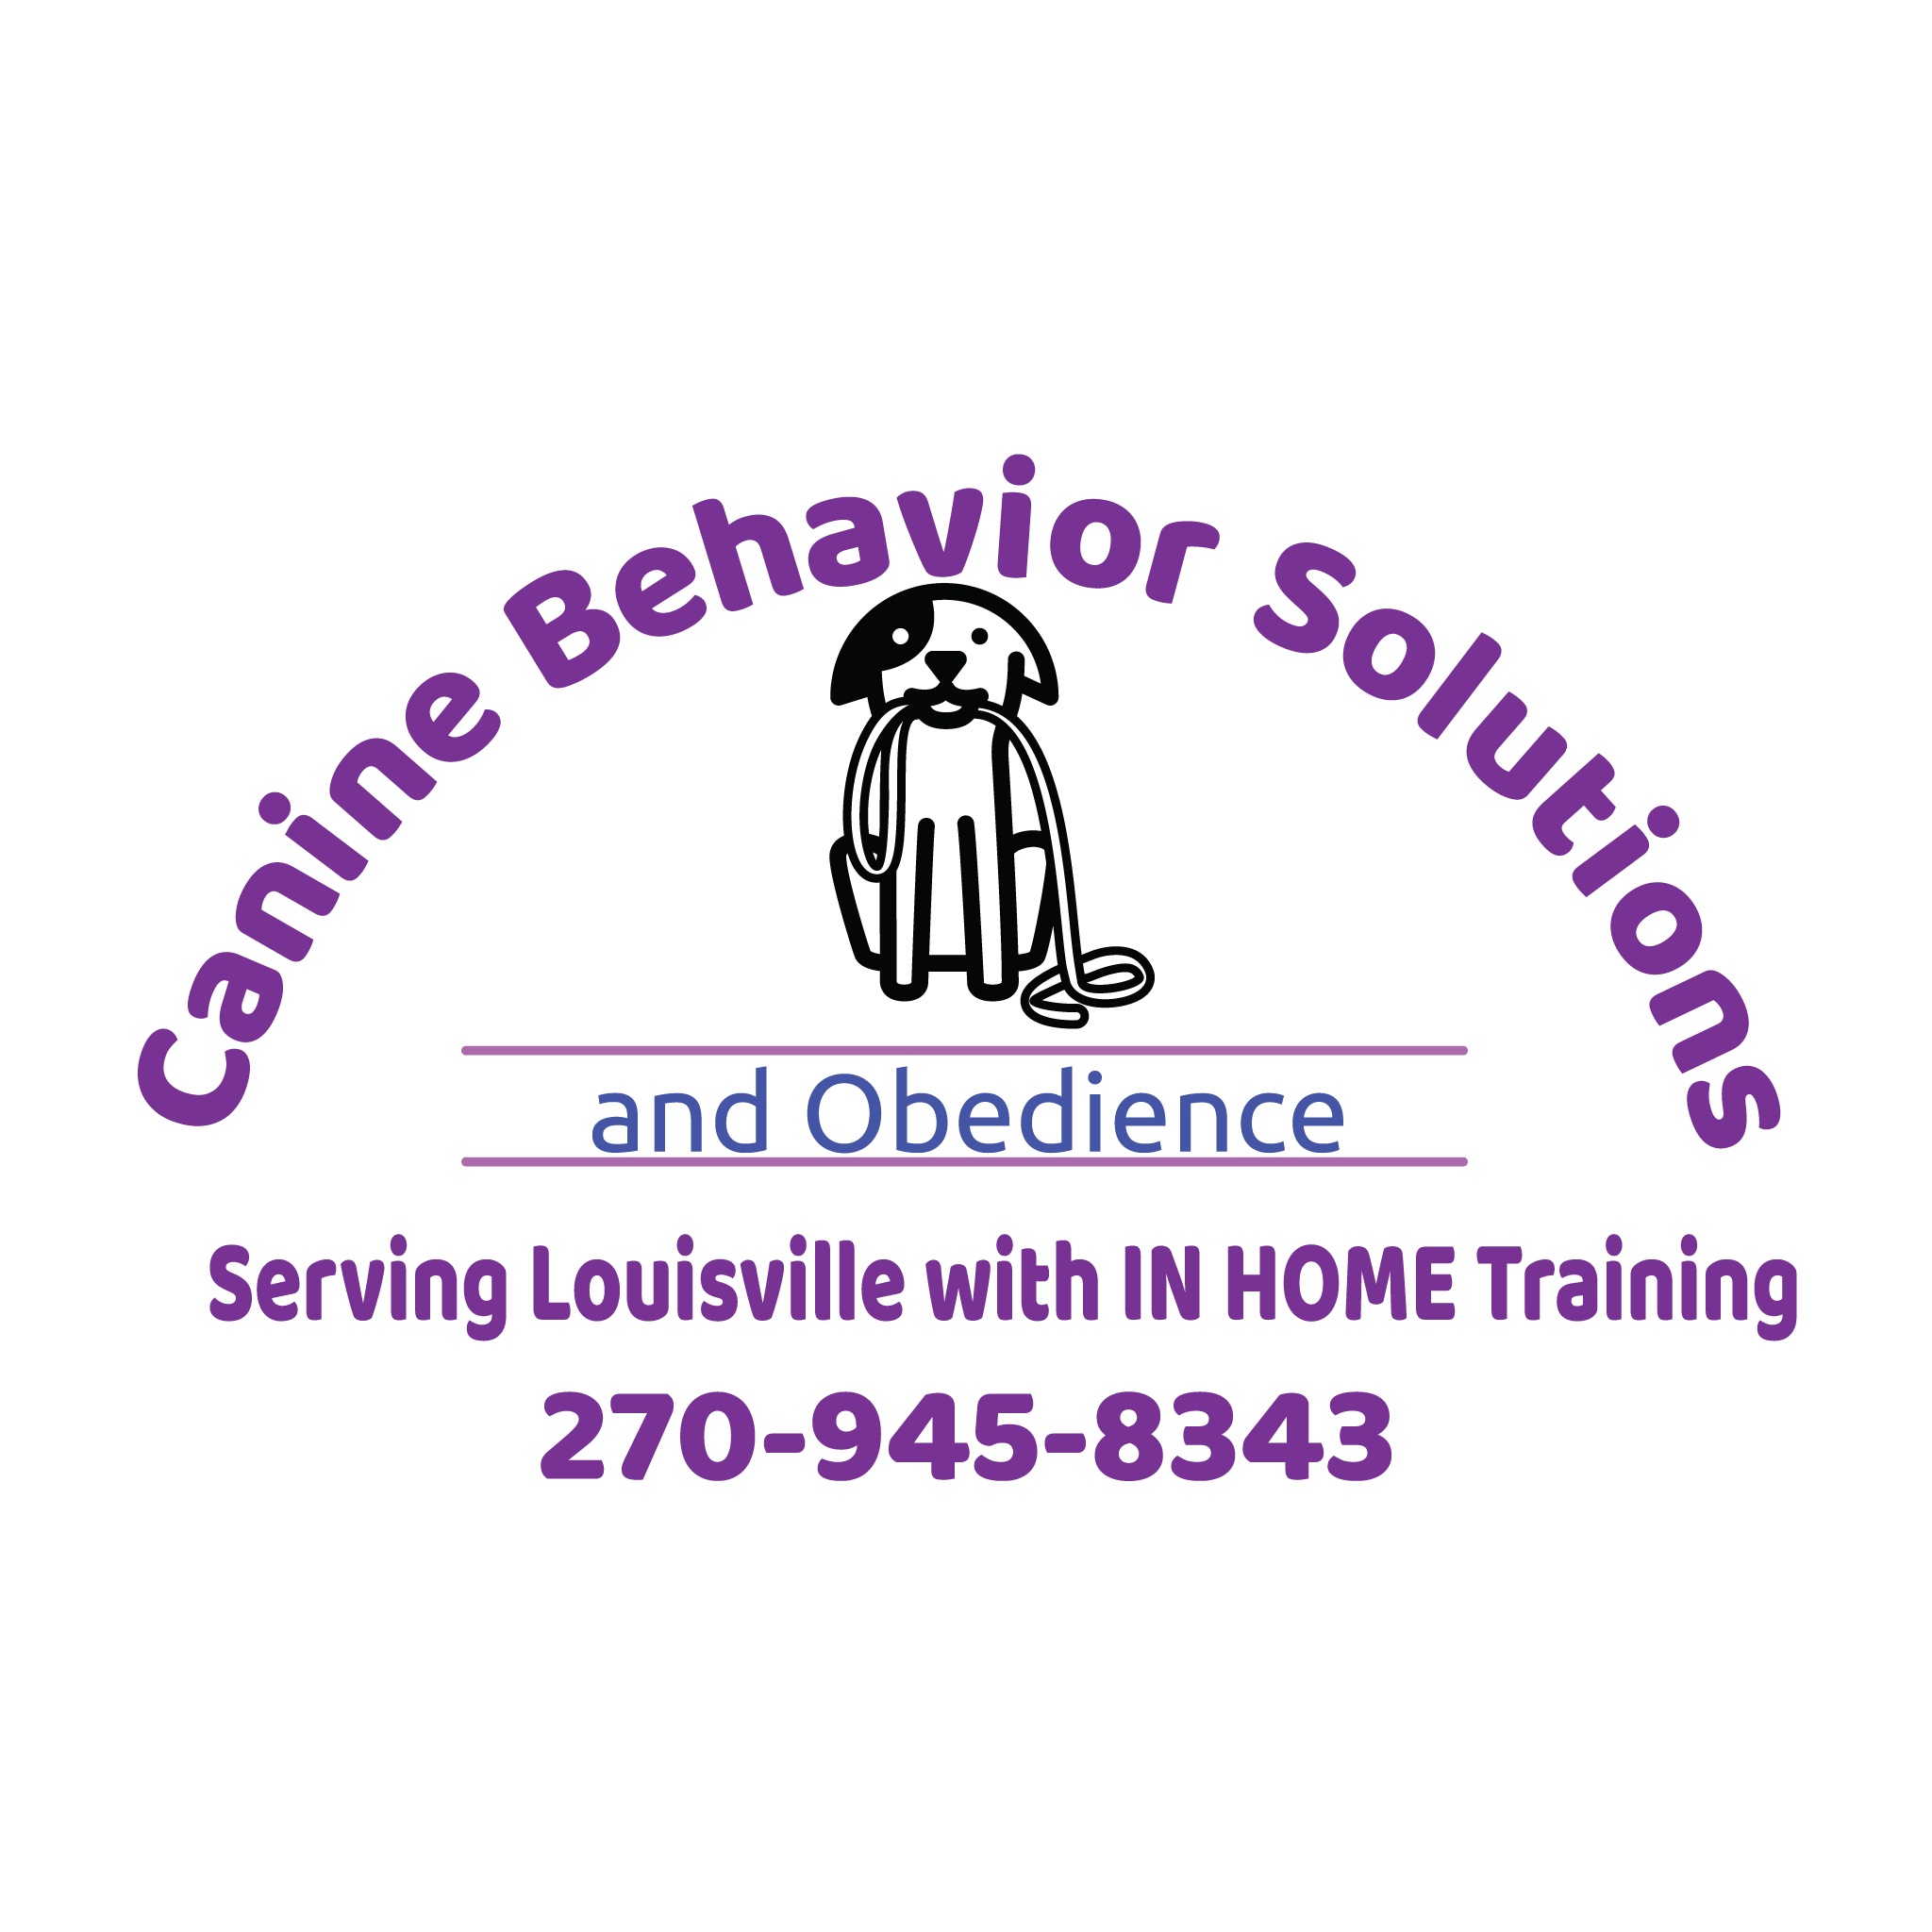 Canine behavior package picture